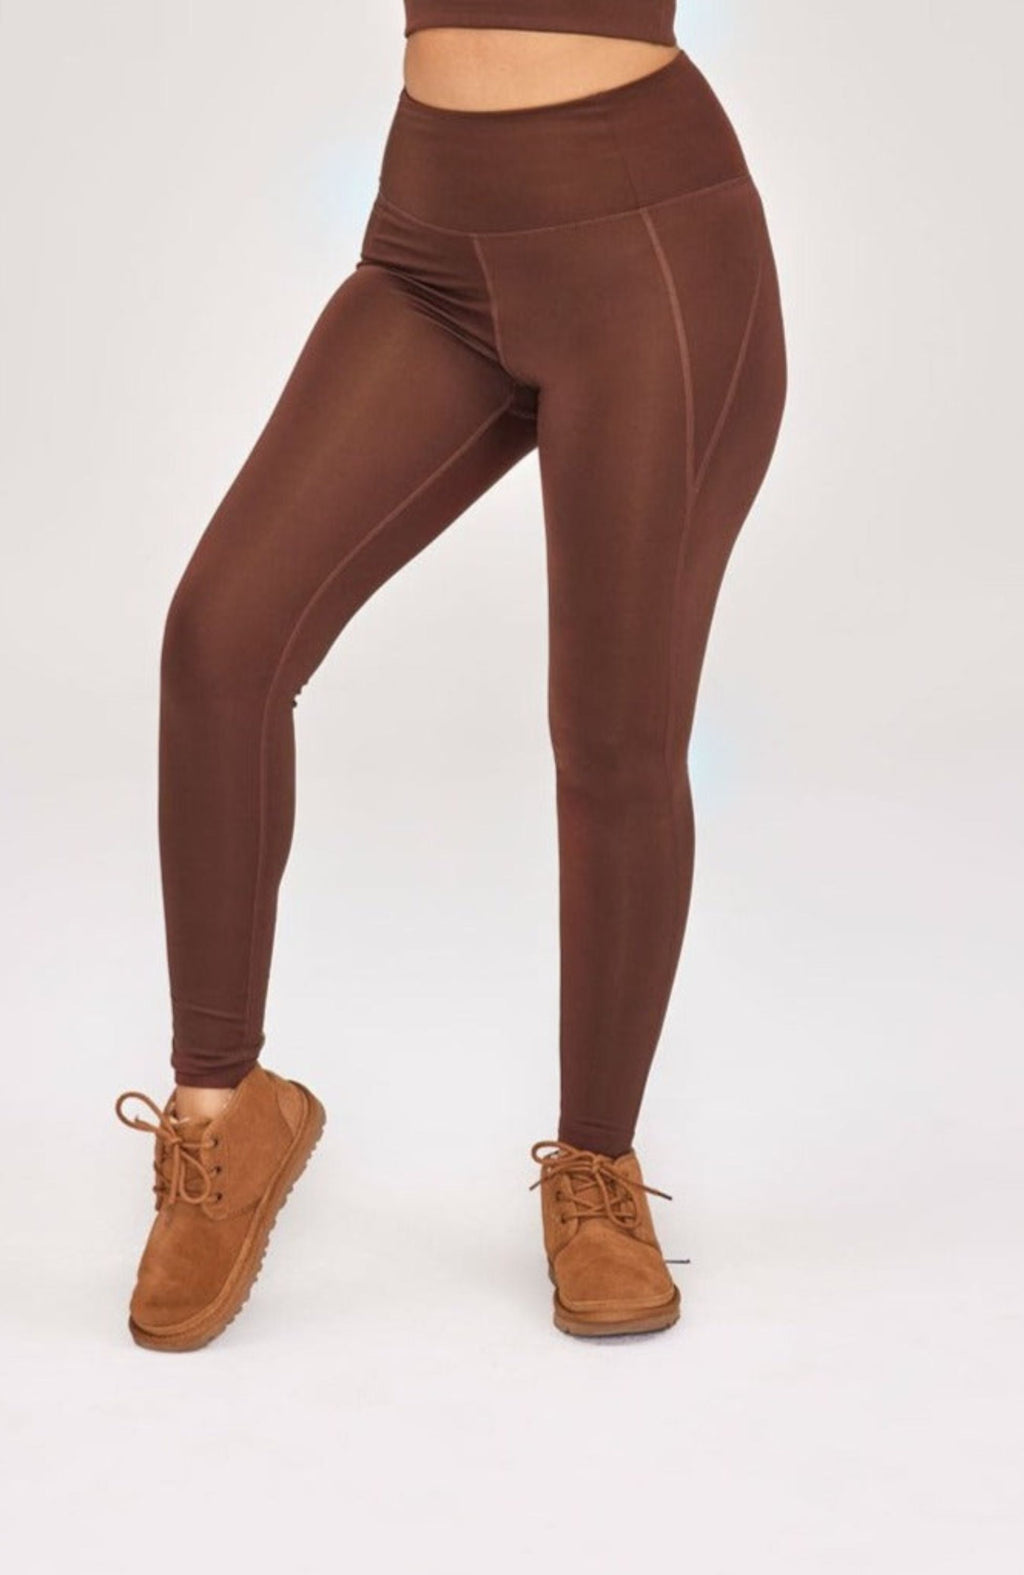 Women's Grape Leaf Go-To Legging by Pact Apparel